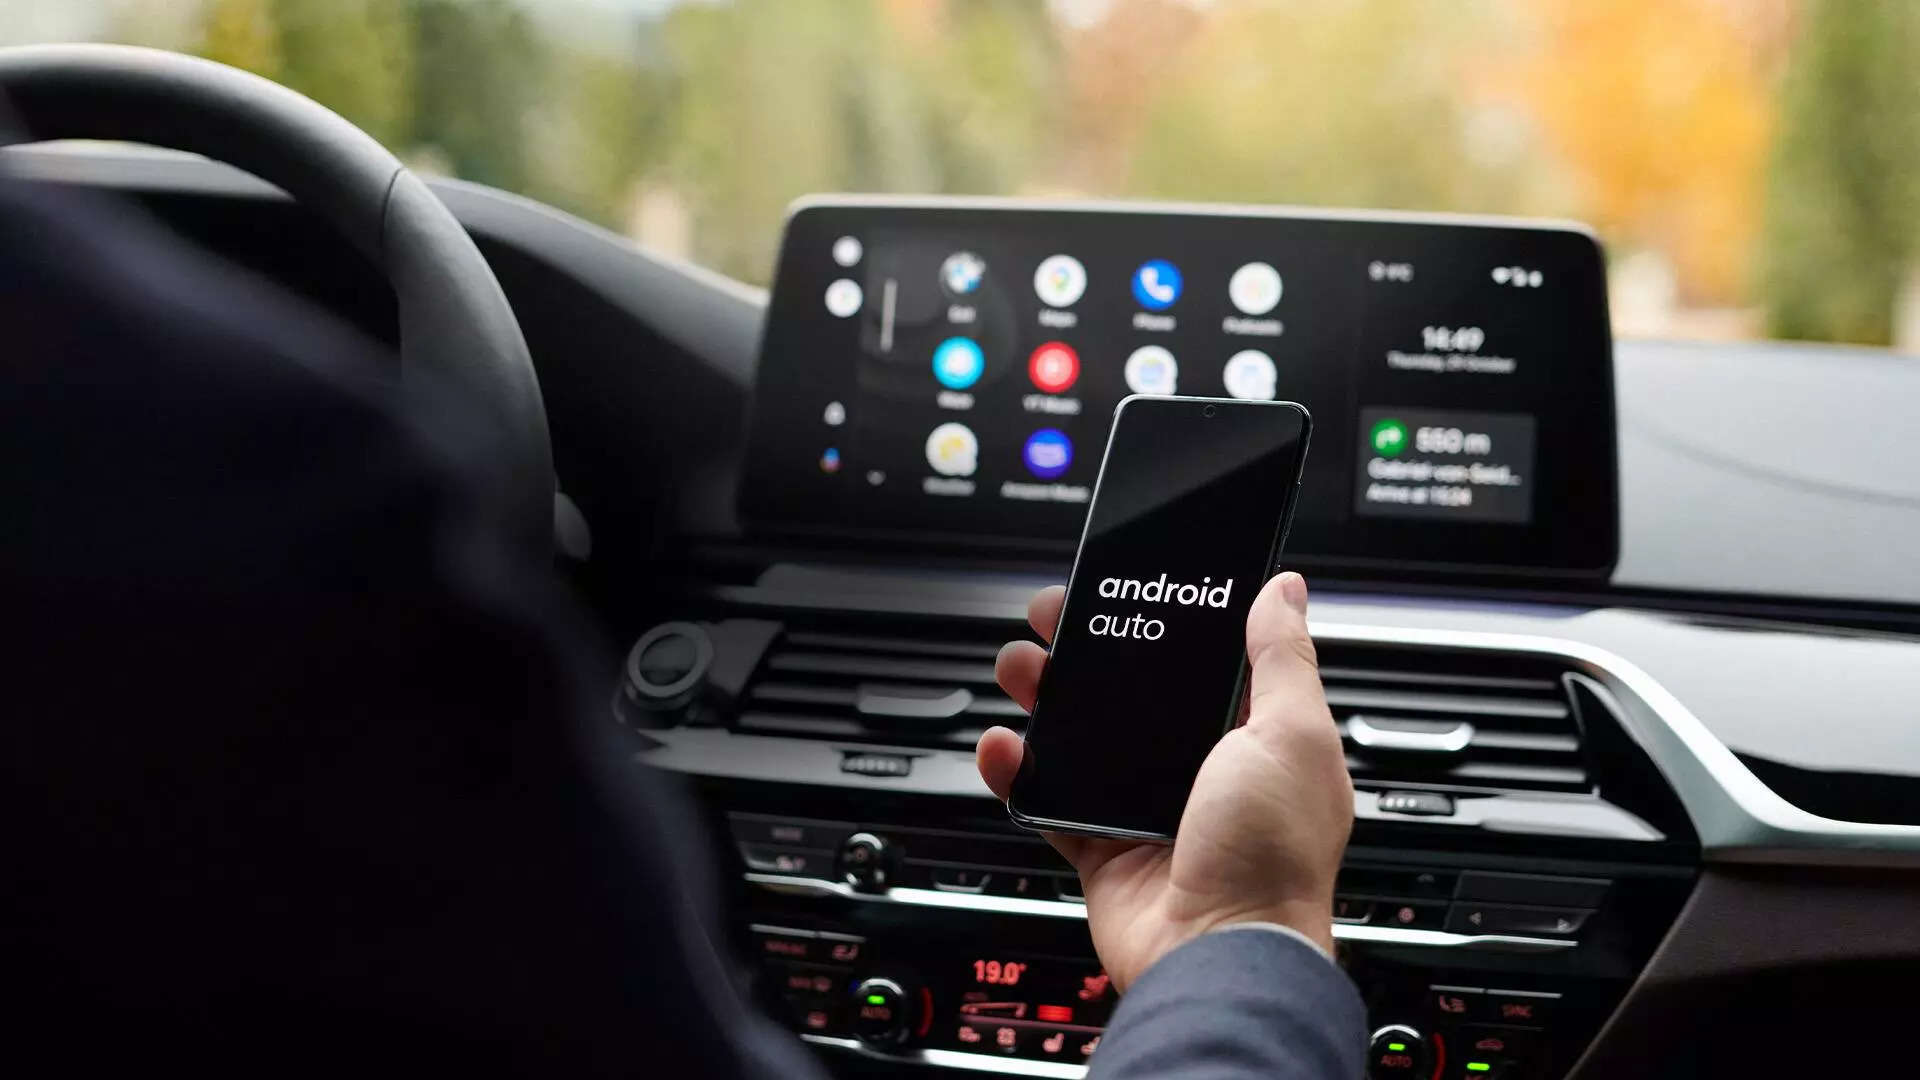  Google is also partnering with Lyft and Kakao Mobility to integrate their driver apps into Android Auto, so drivers will be able to view and accept rides right from their car display.